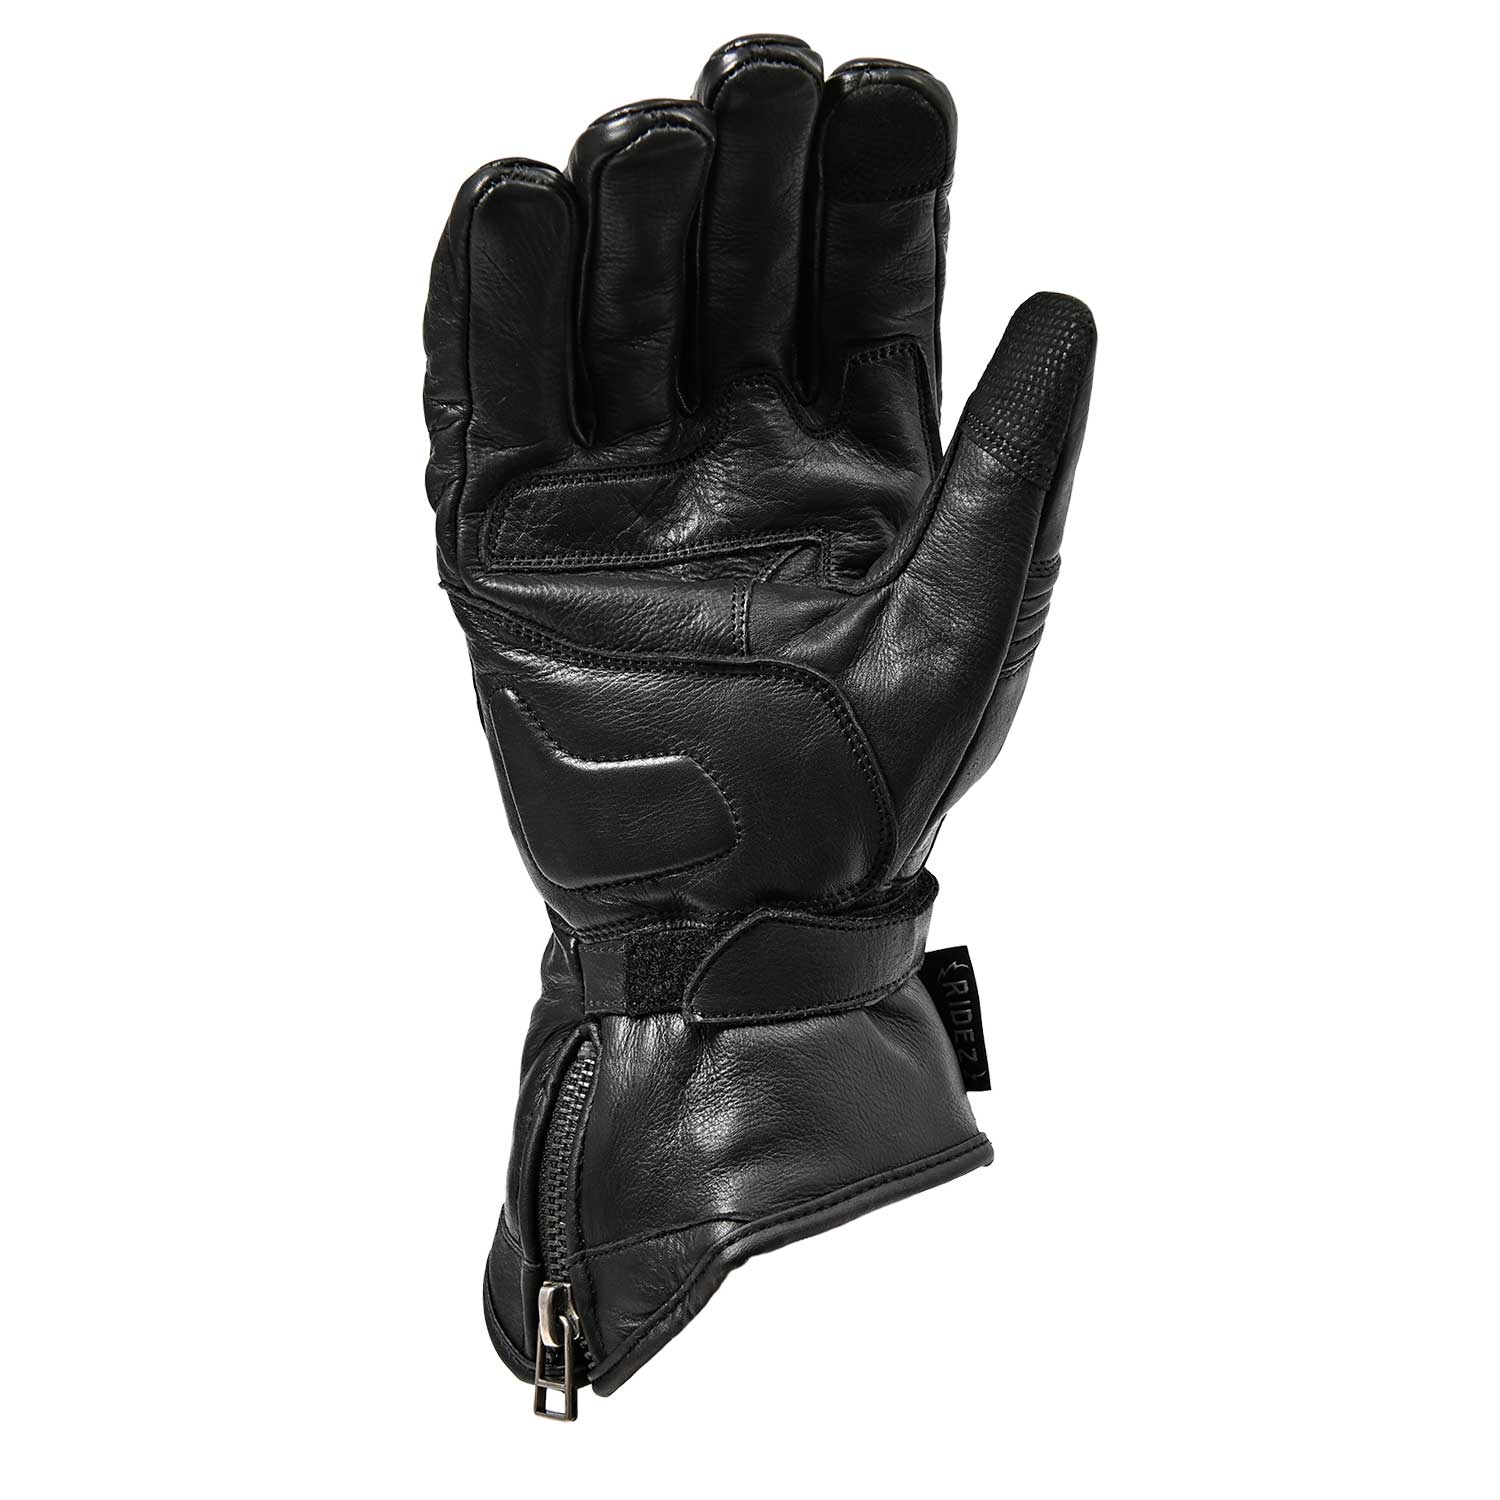 RIDEZ HECTOR GLOVES　バイク用 レザーグローブ BLACK  RWG09